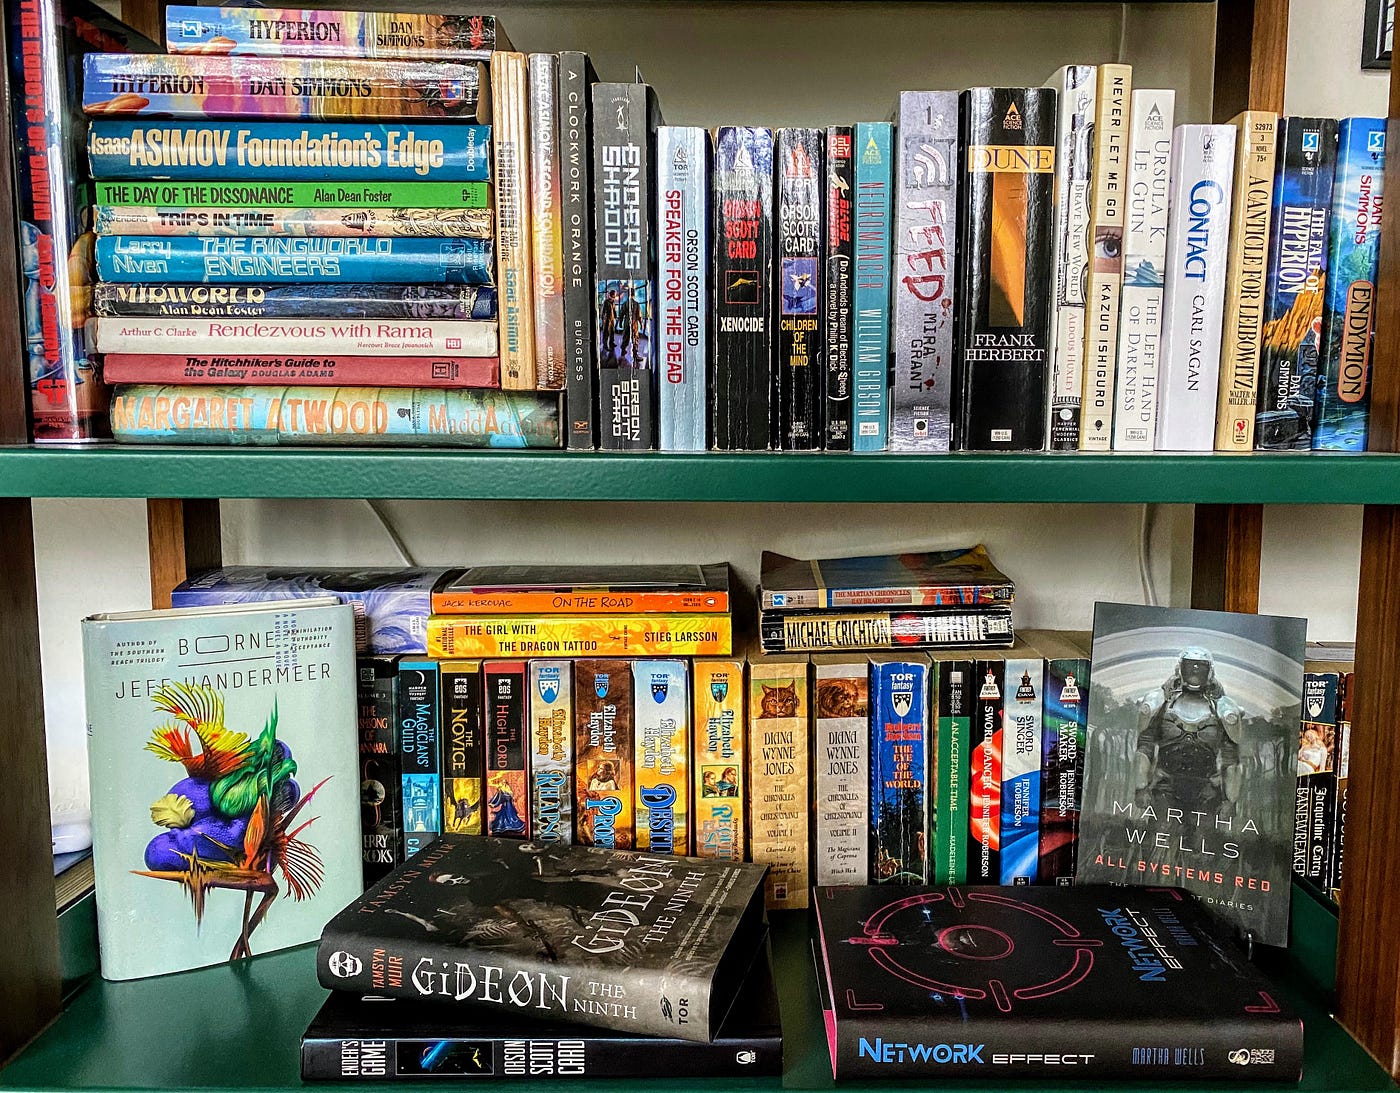 Determining the best scifi/fantasy books since 1970